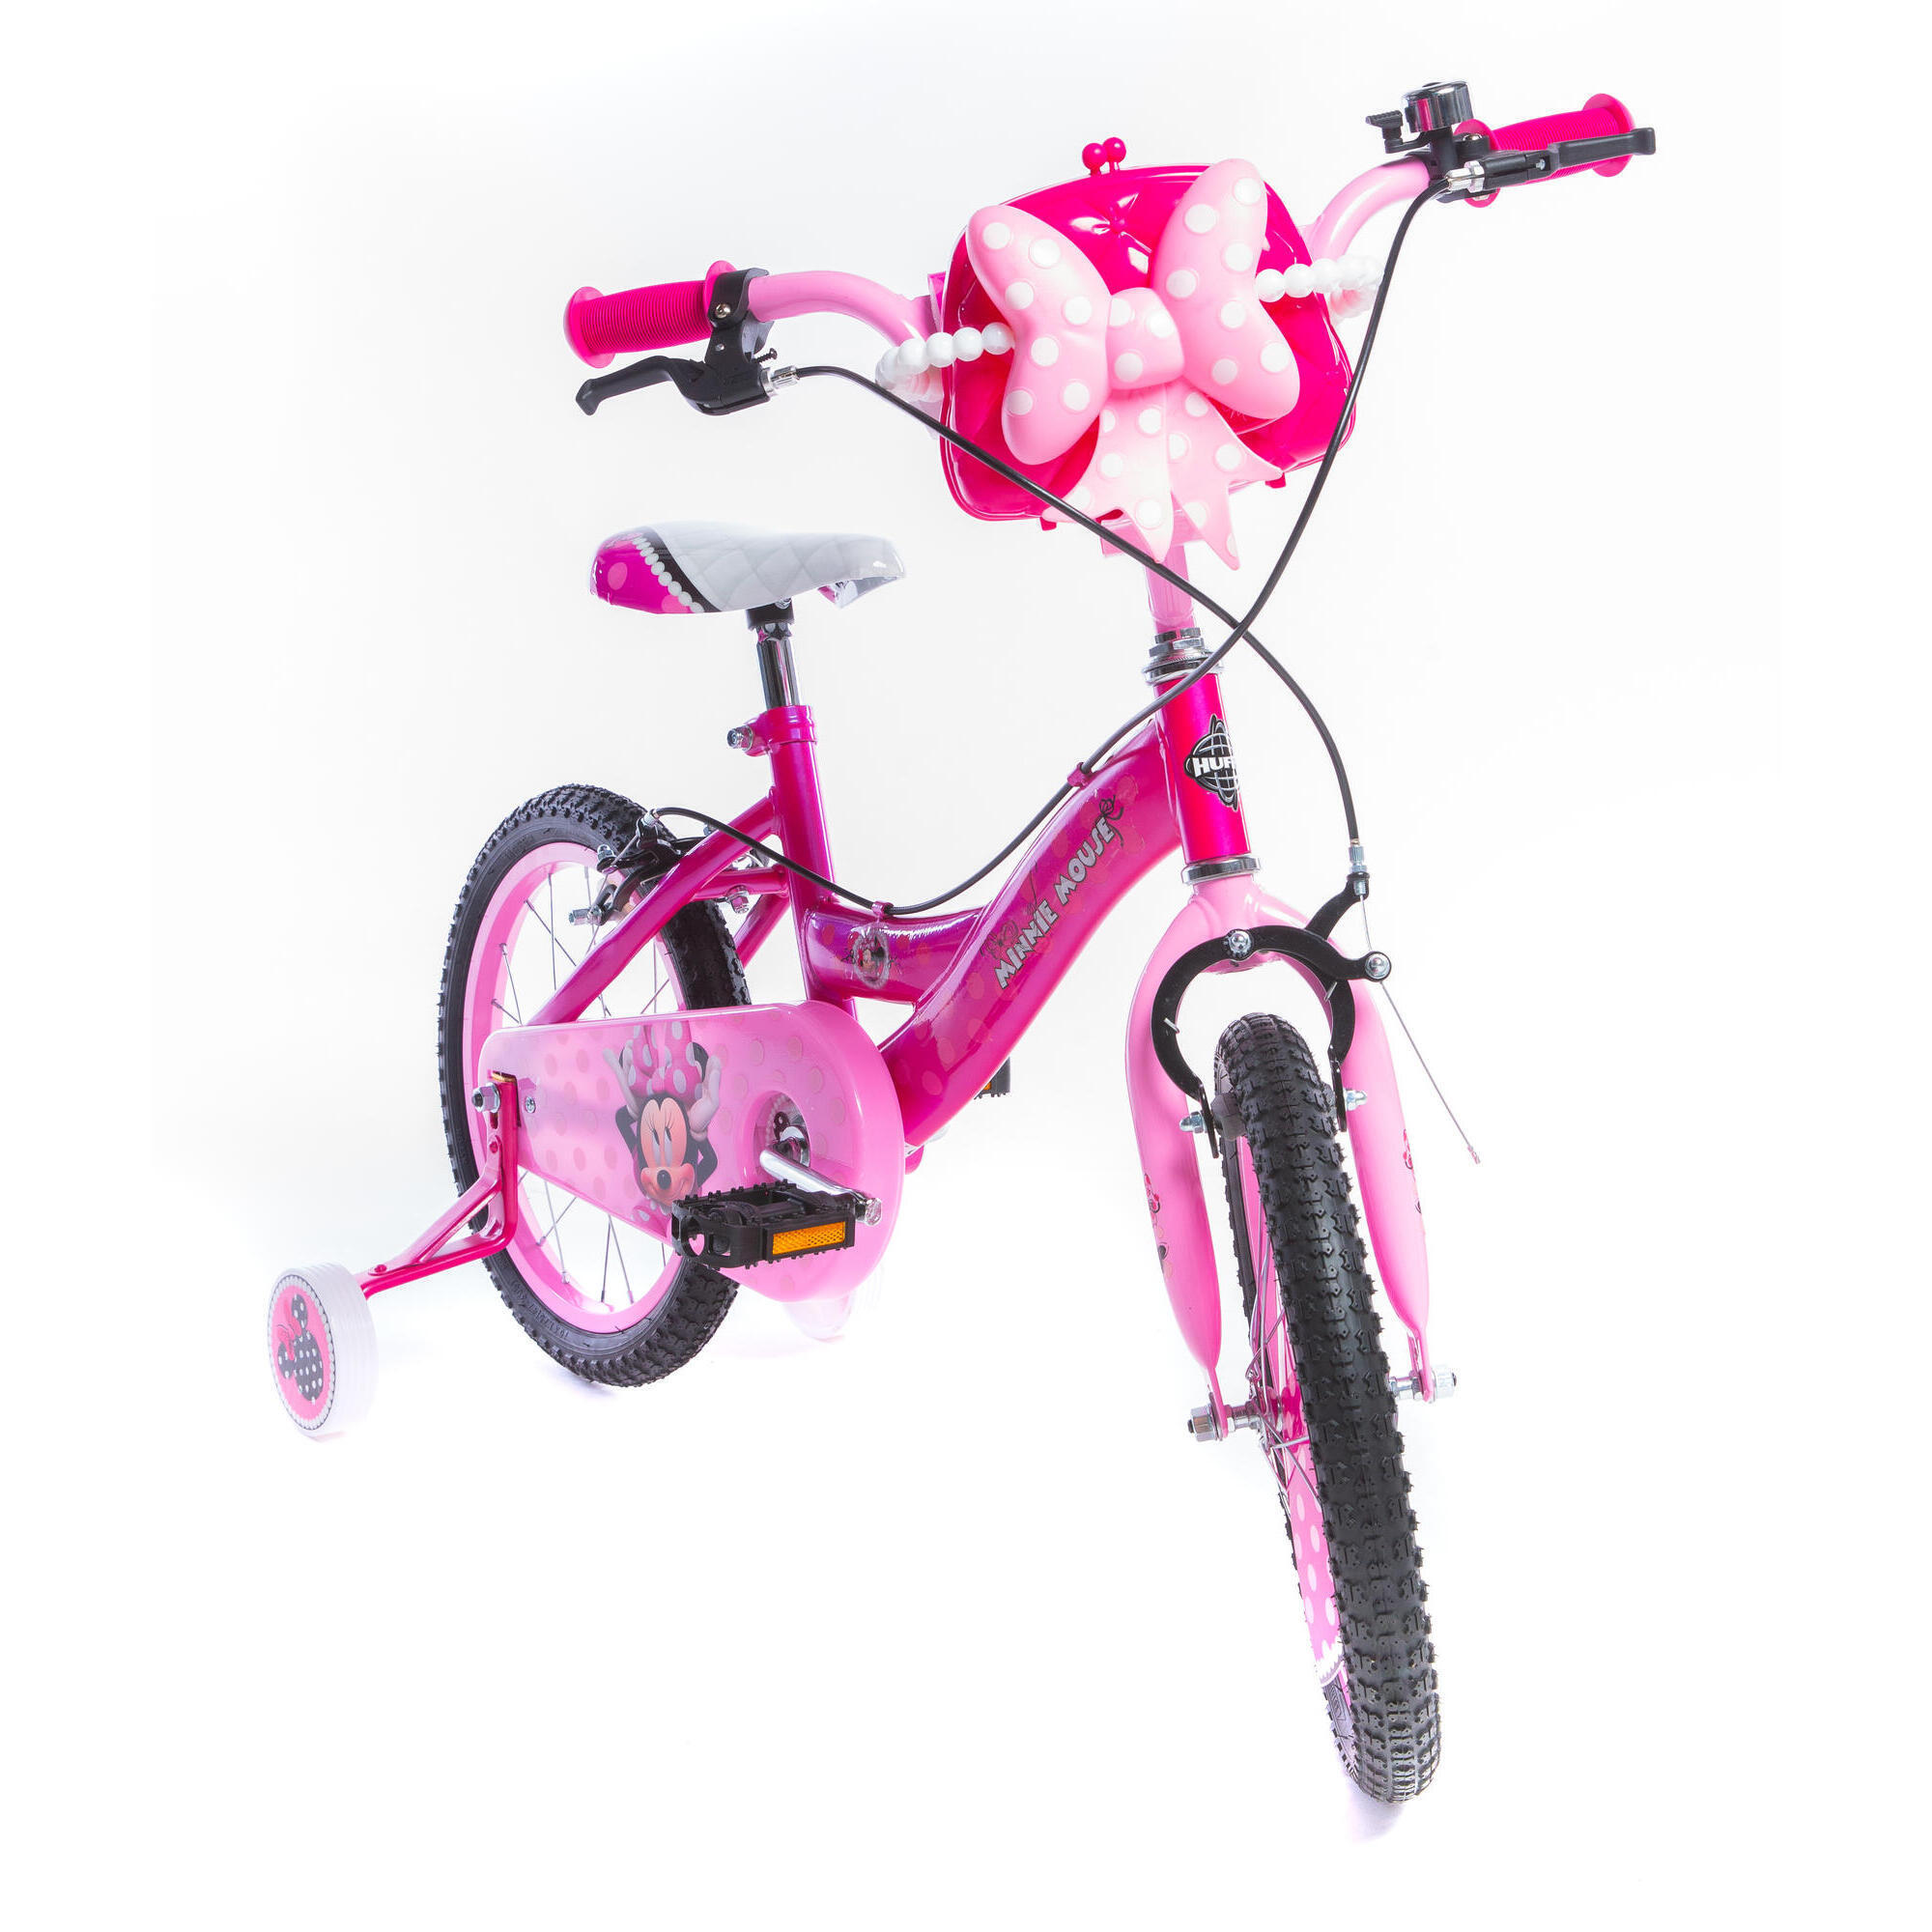 Huffy Disney Minnie Mouse Kids Bike 16 Inch Pink For 5-7 Year Old 